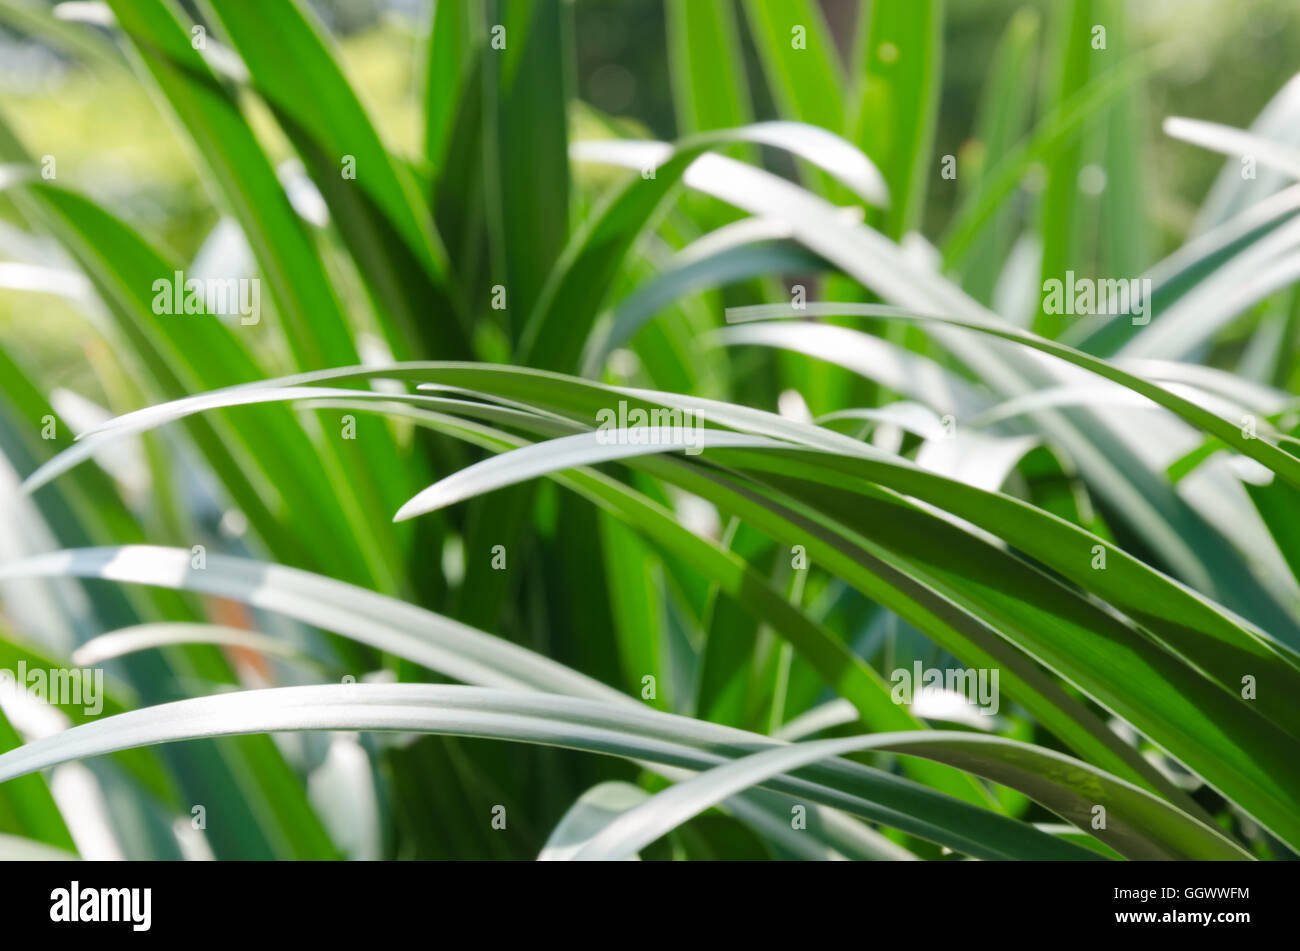 Blurry Background of Plant Leaves. Stock Photo